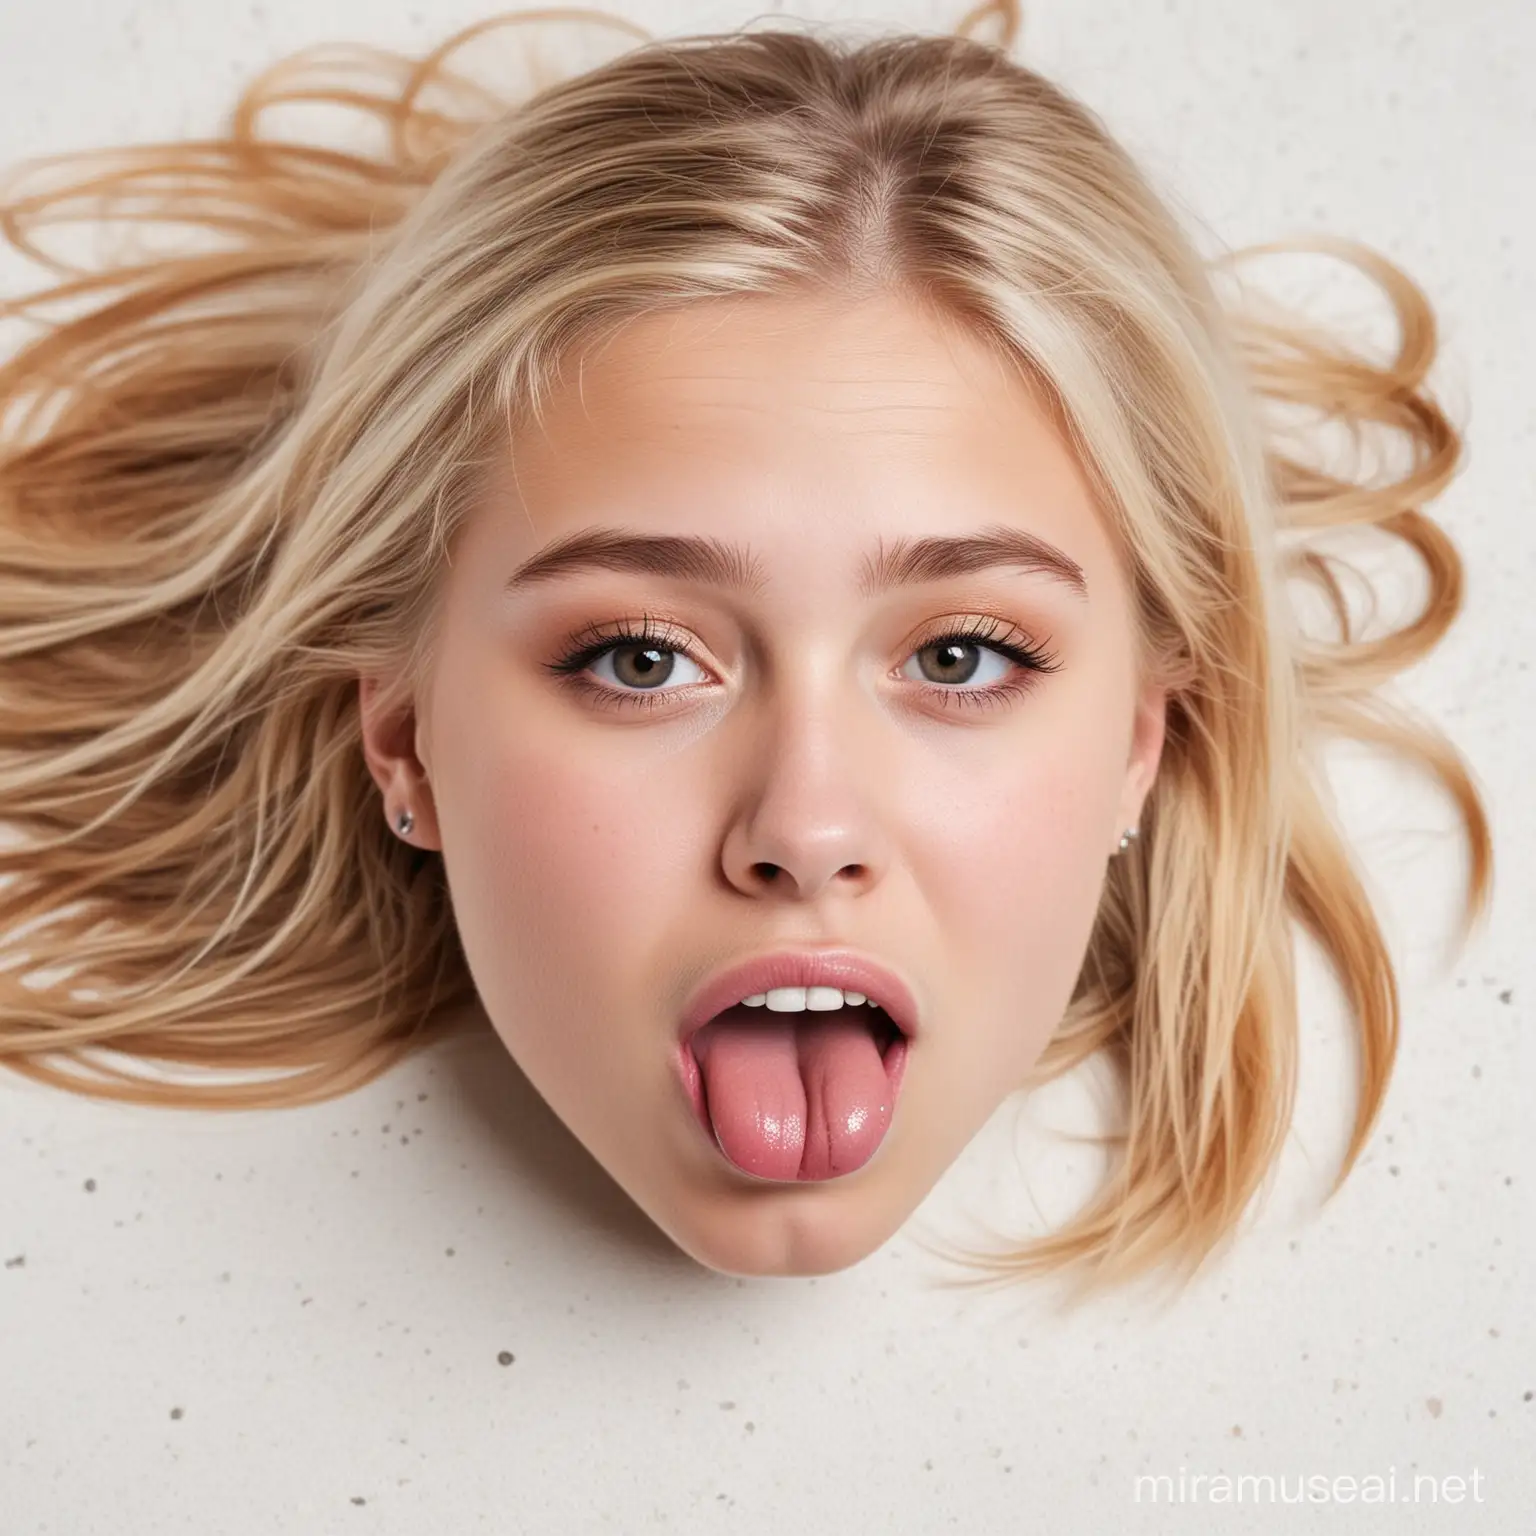 Playful Blonde Girl Sticking Out Tongue on White Background